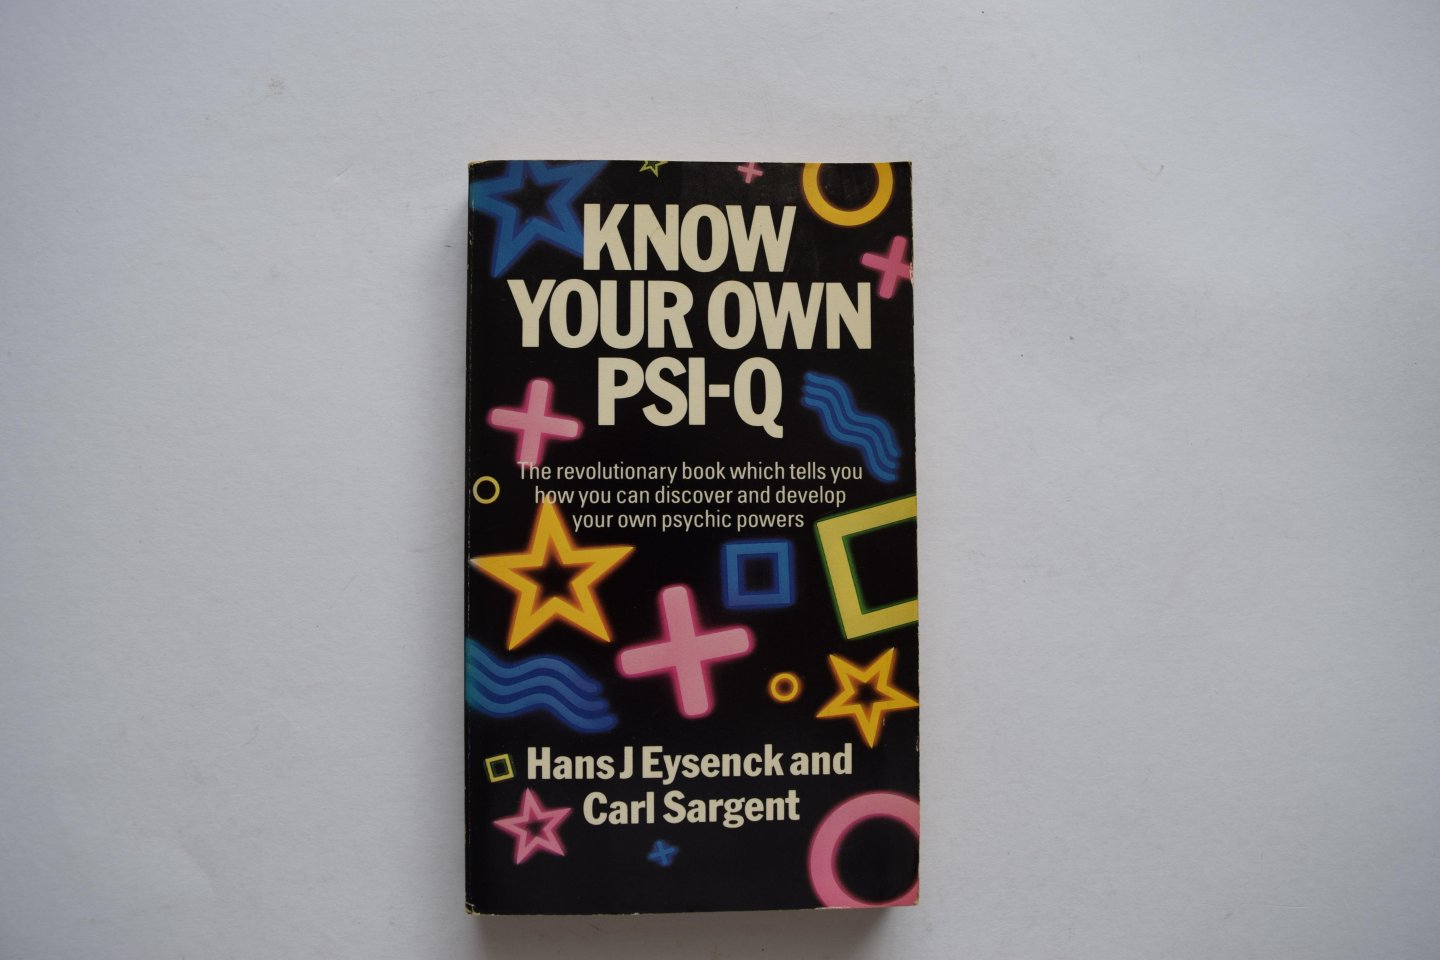 Hans J Eysenck and Carl Sargent - Know your own psi-q